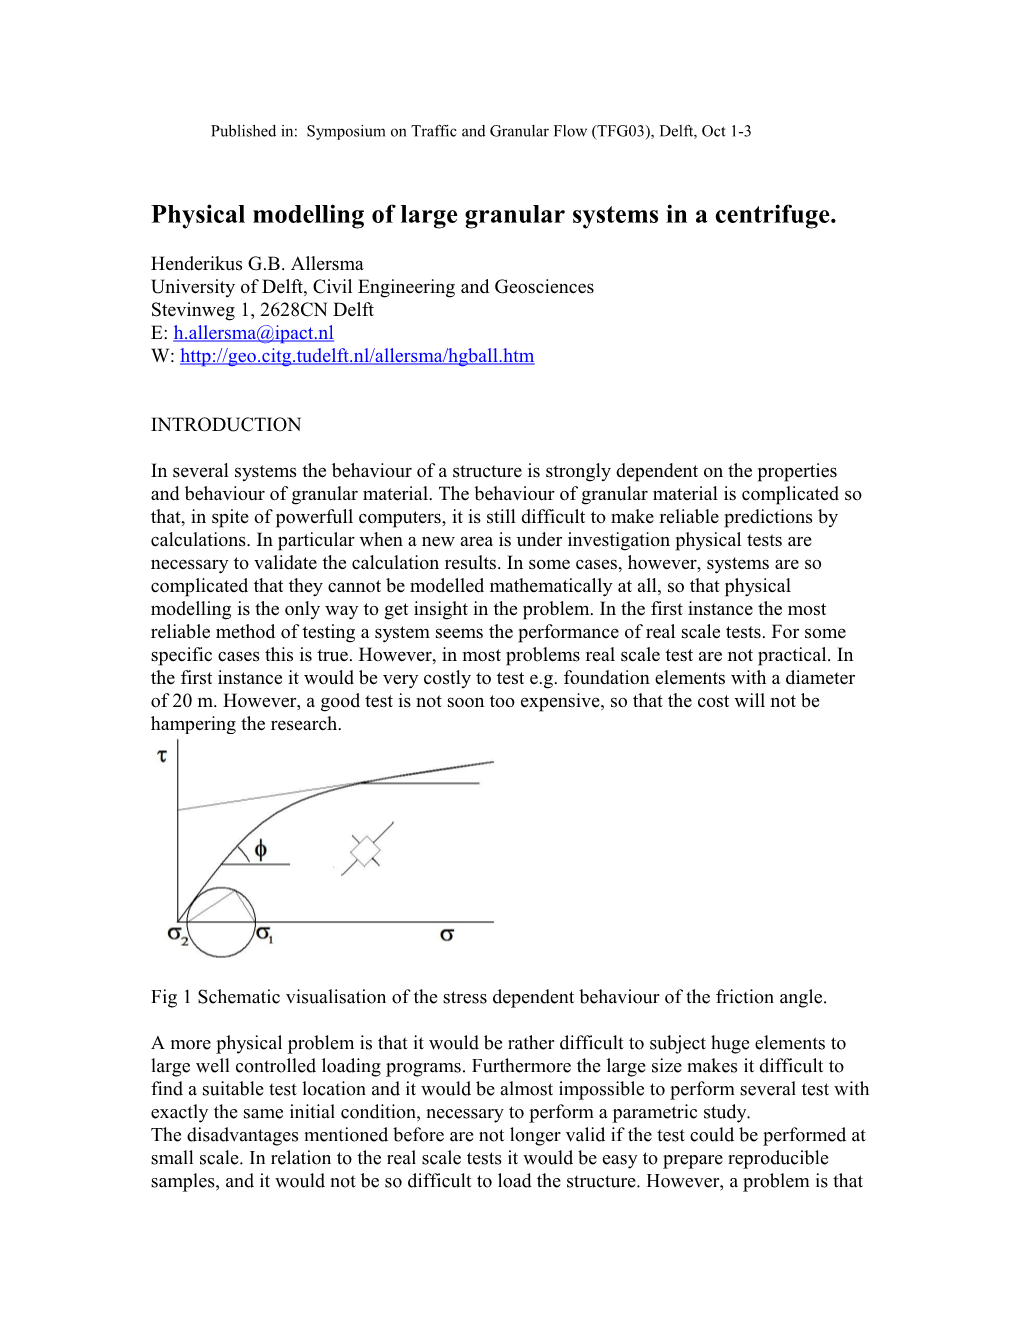 Physical Modelling of Granular Systems